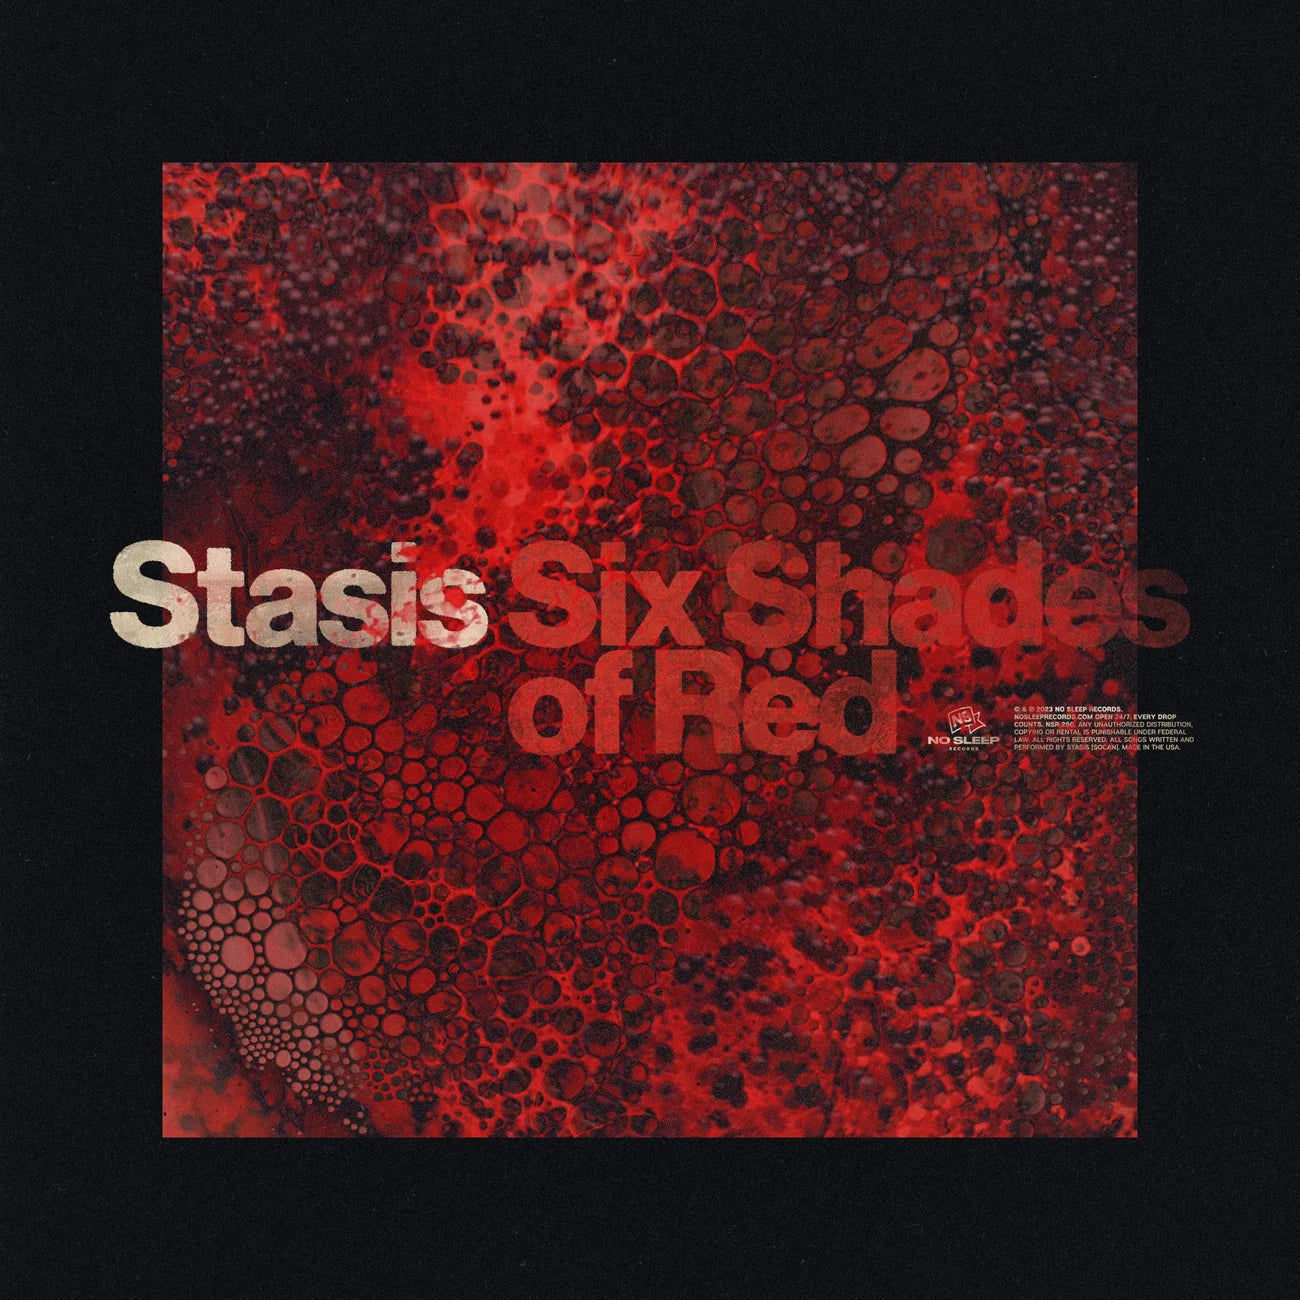 Stasis "Six Shades of Red" LP